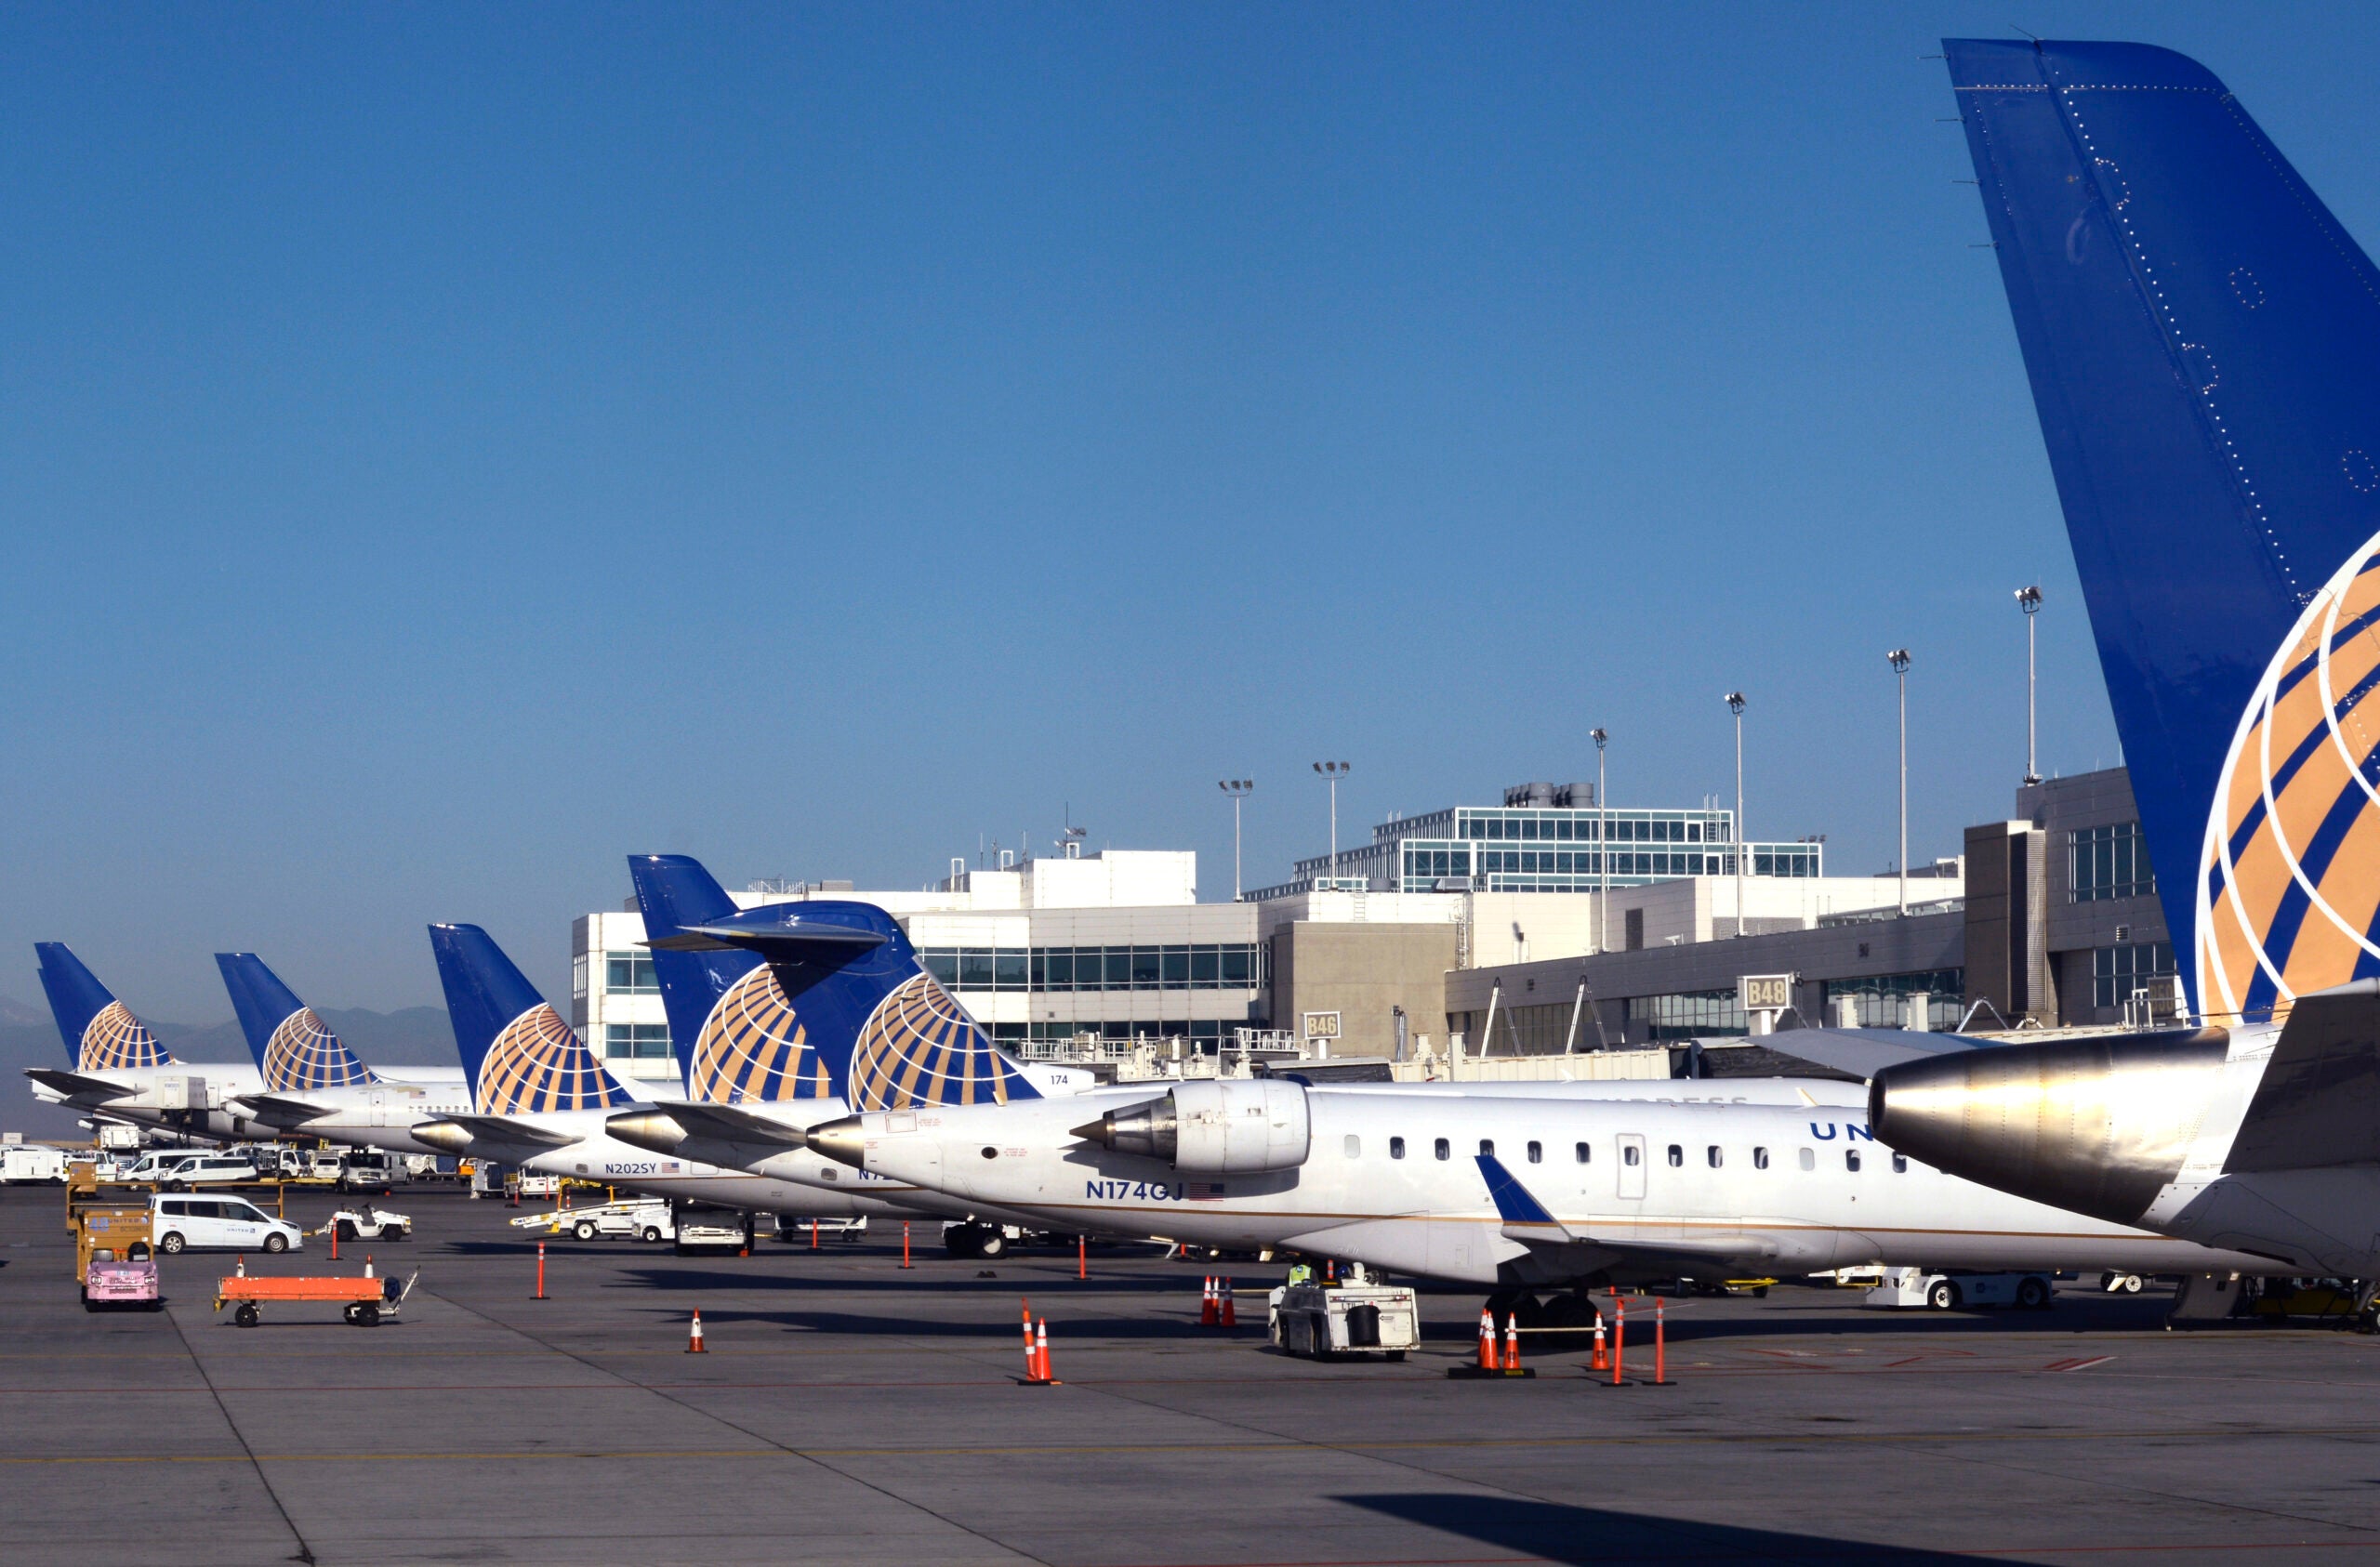 A row of United Airlines passenger planes at Denver International Airport